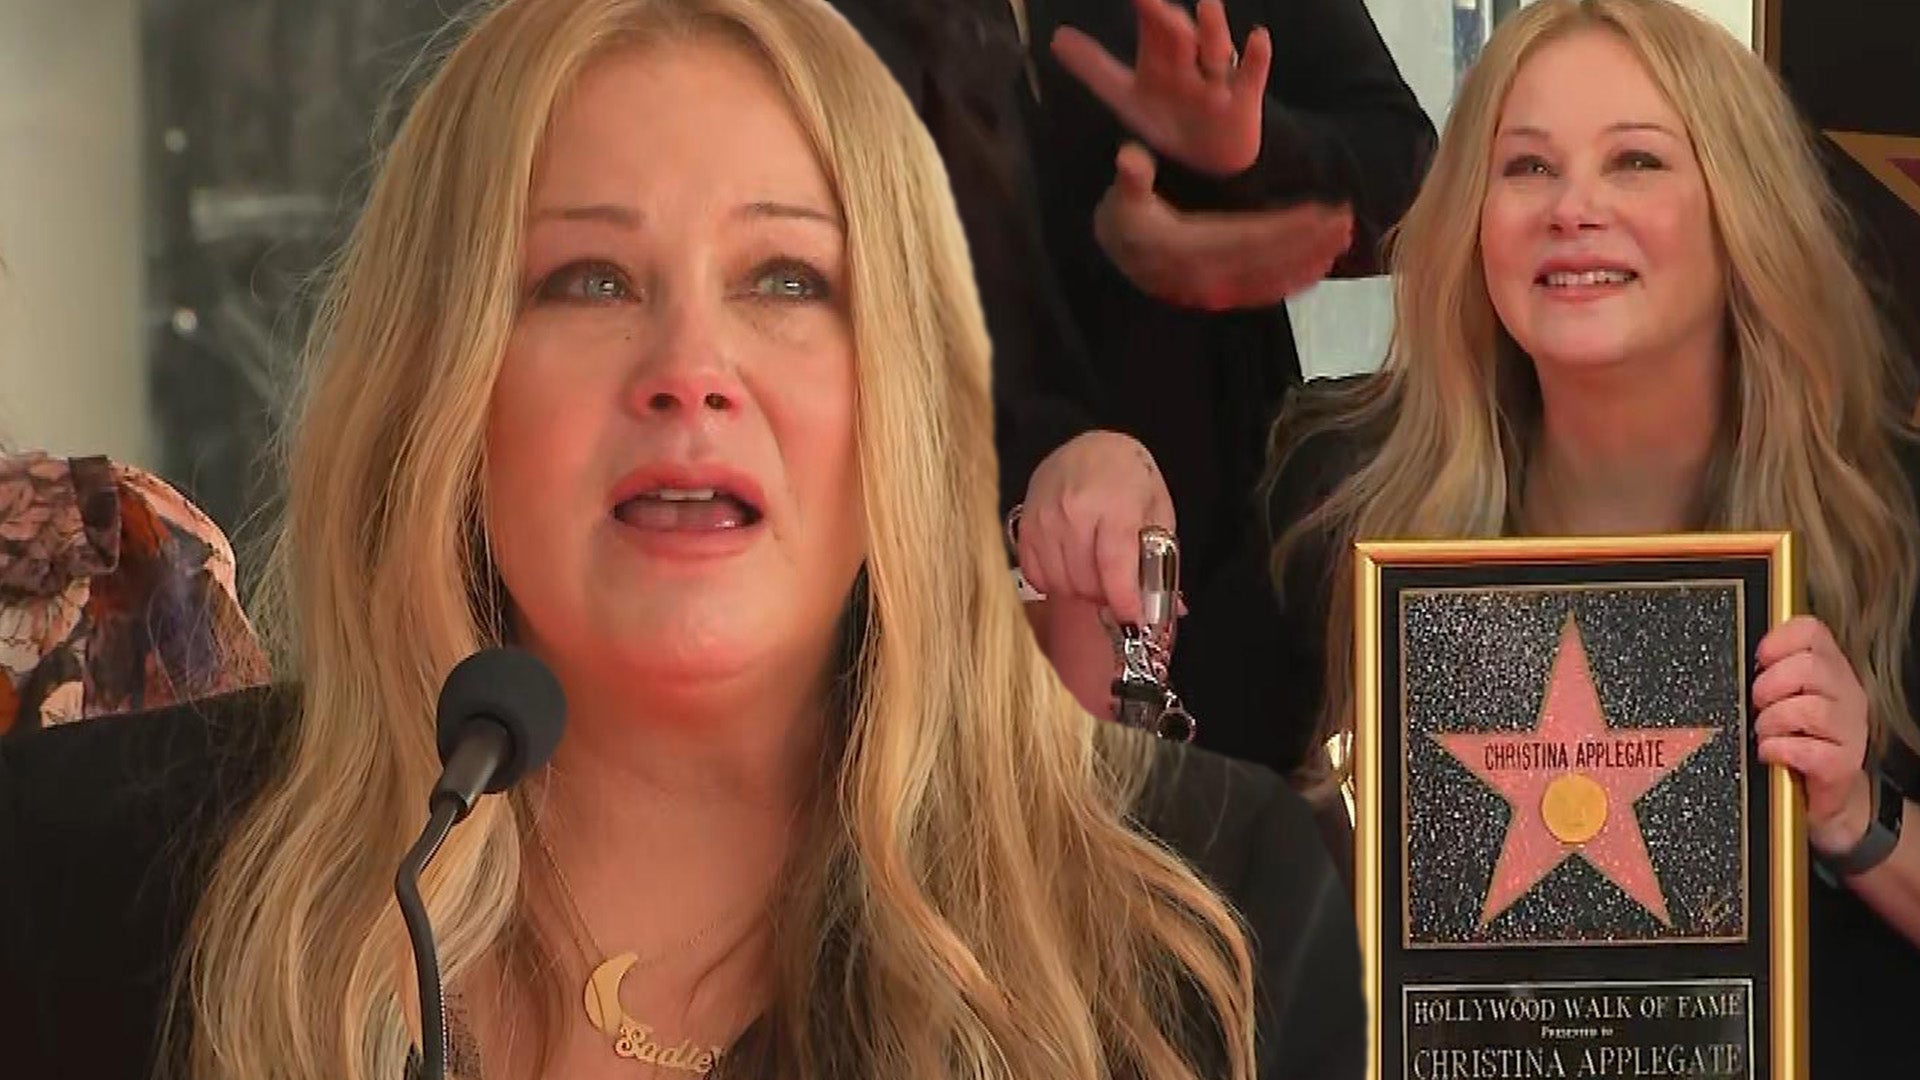 Christina Applegate Gets Emotional During Speech in First Public Appearance Since MS Diagnosis Entertainment Tonight photo